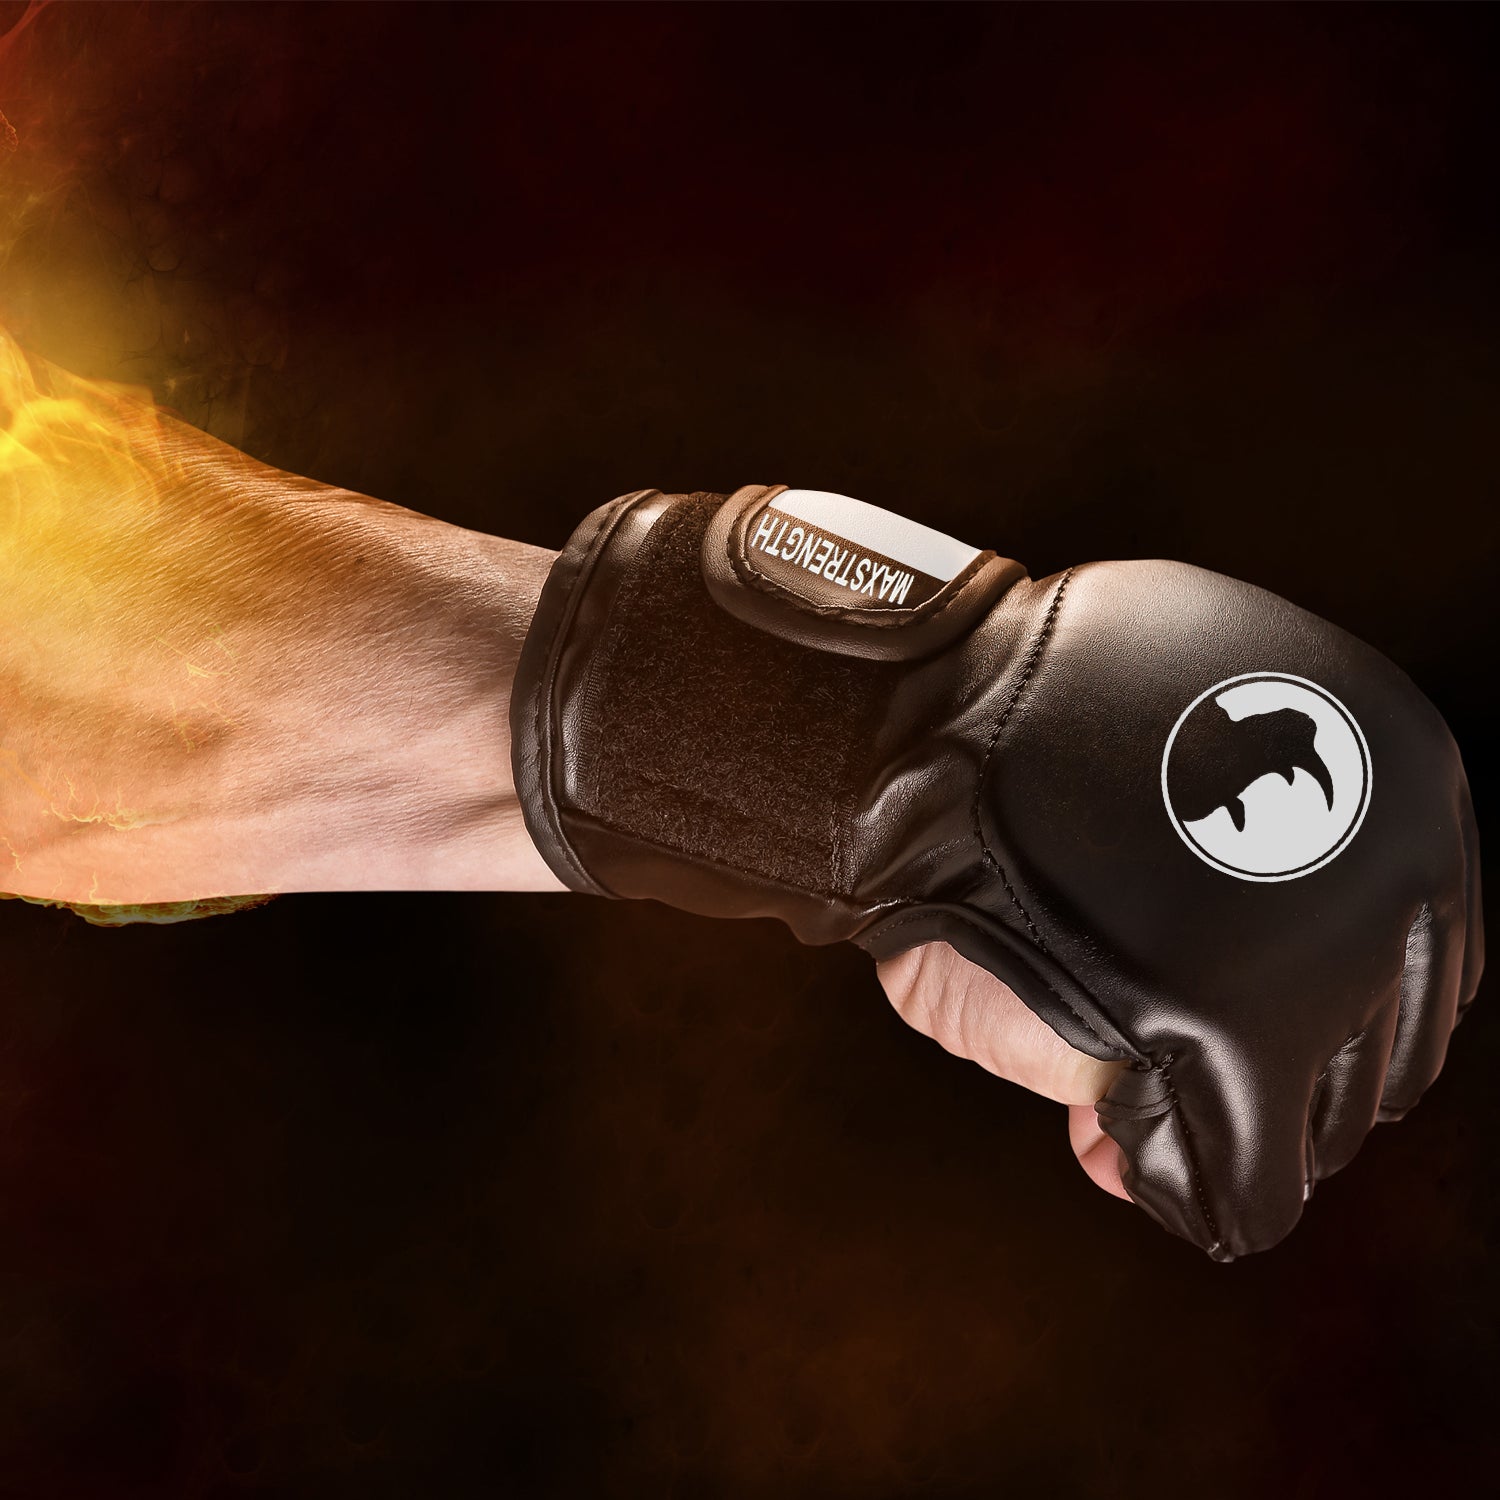 Grappling mma gloves